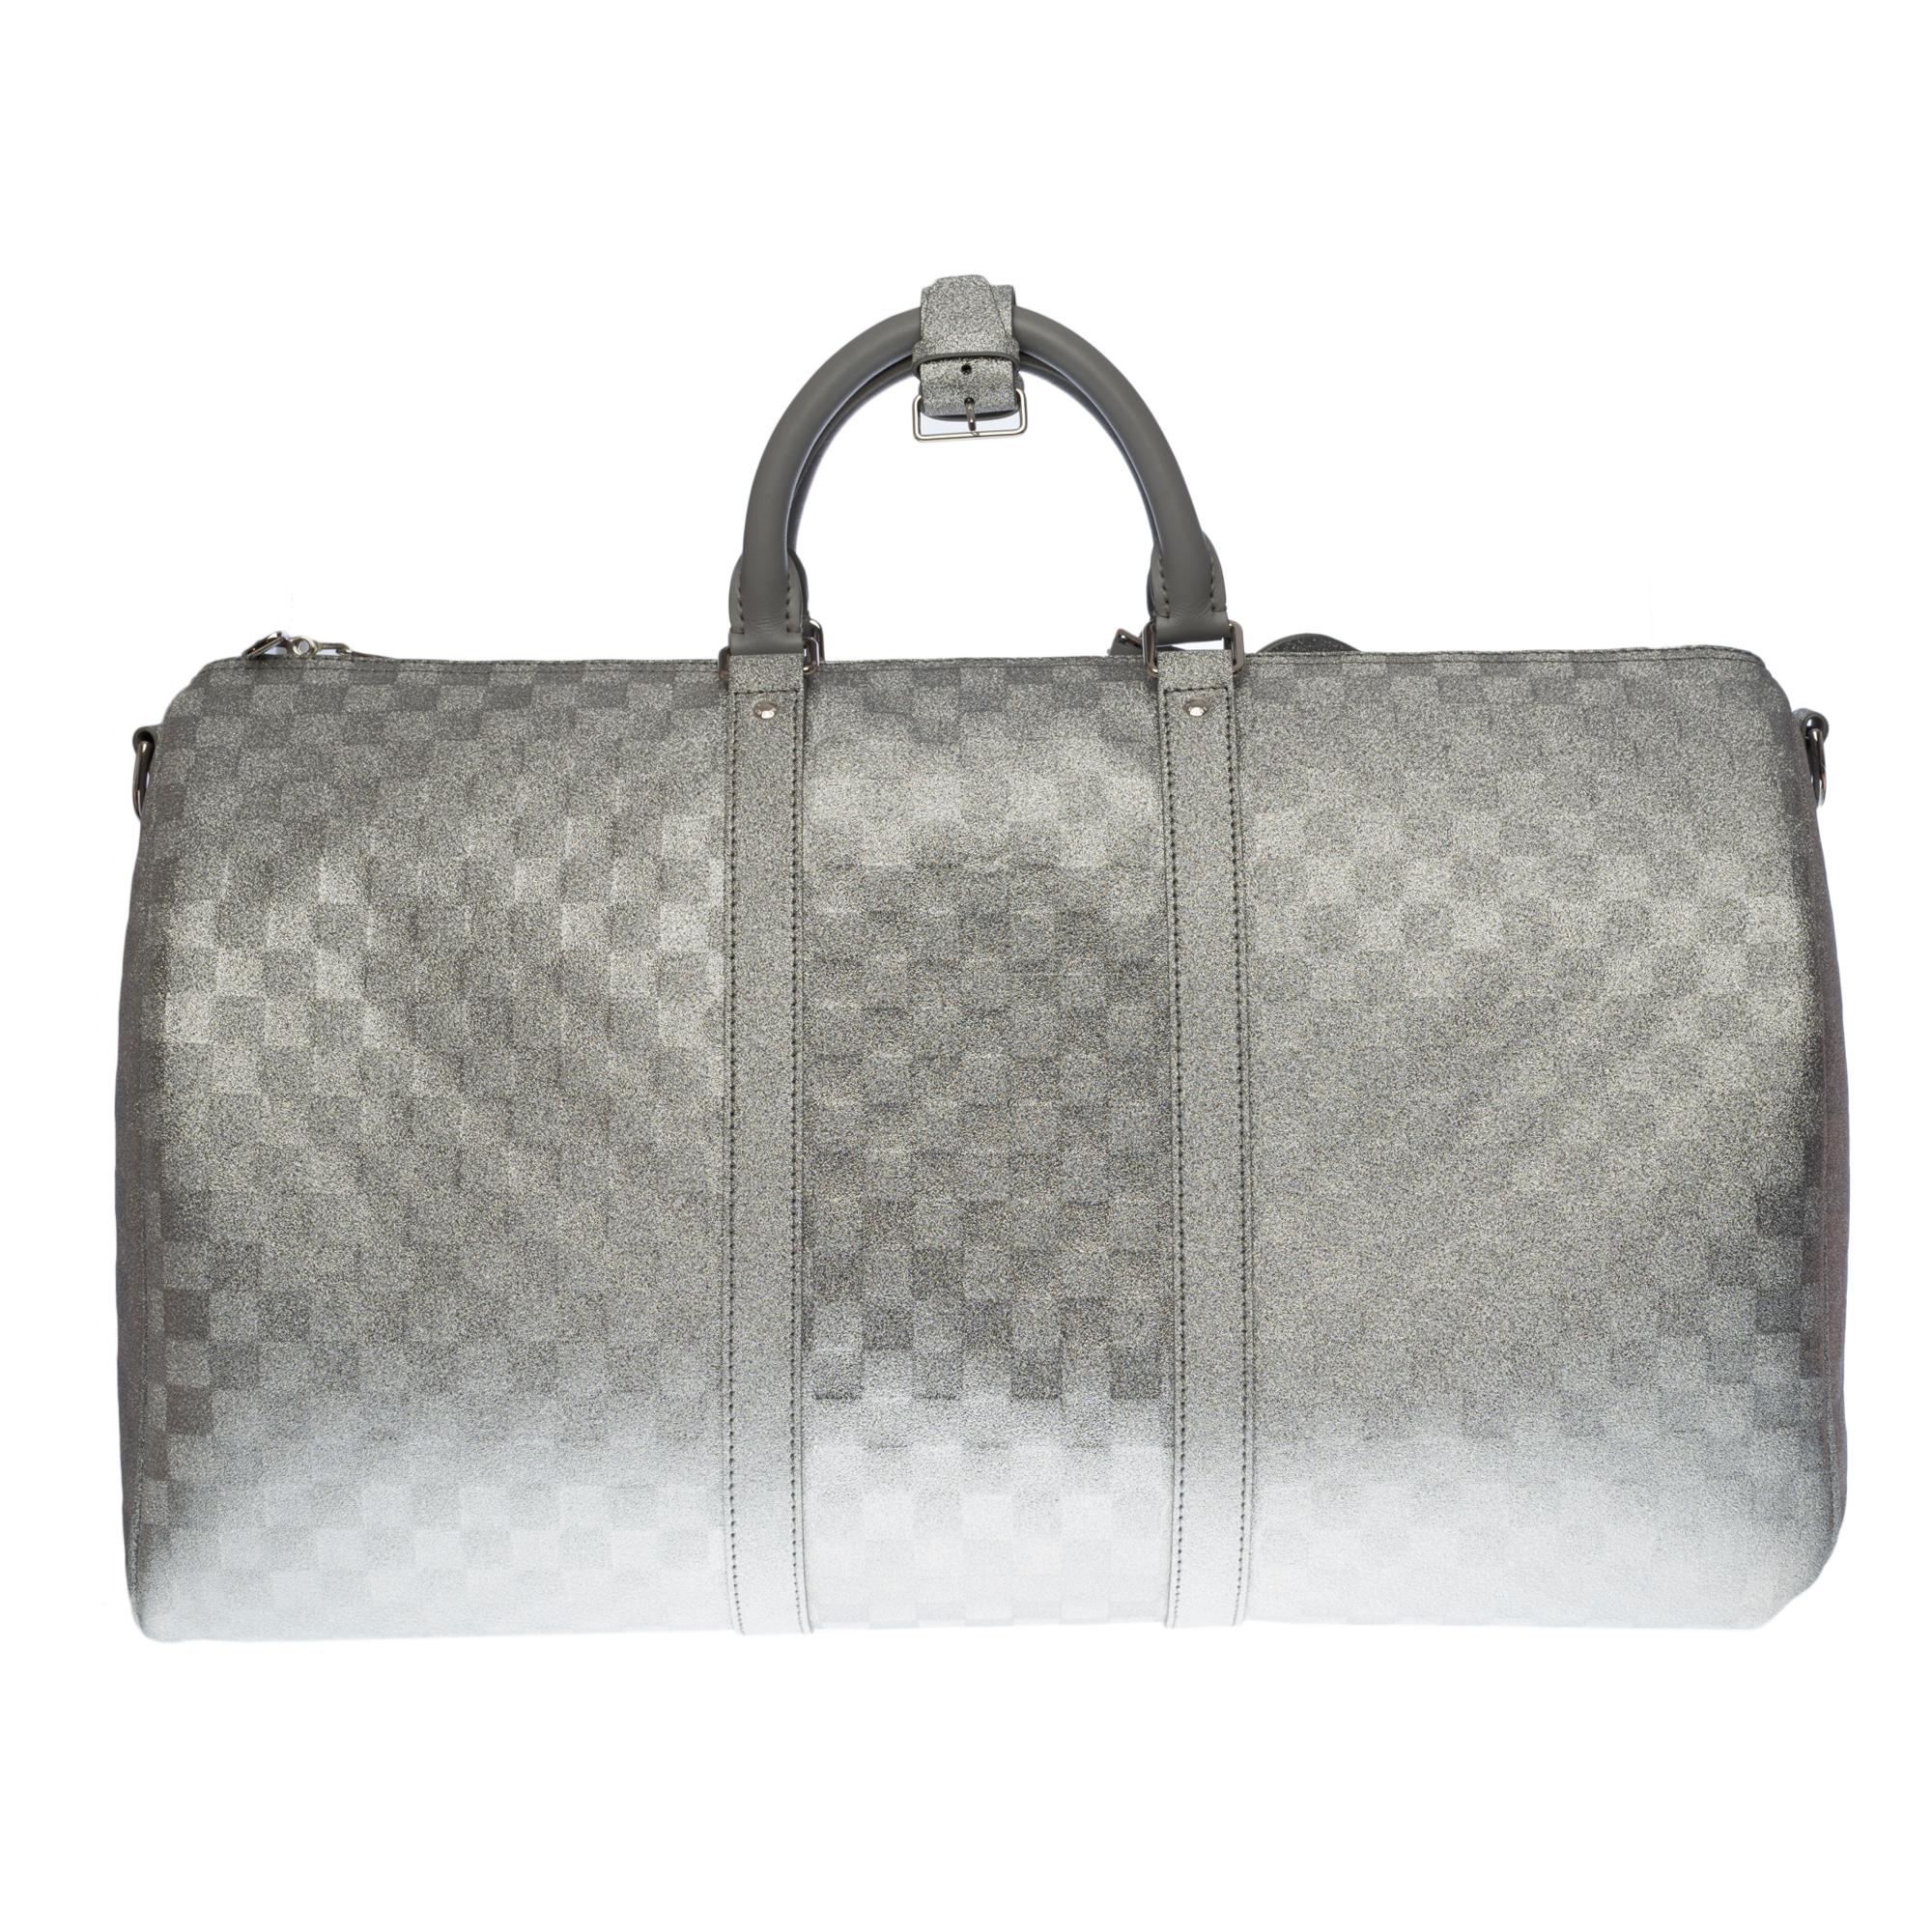 ULTRA EXCLUSIVE - SOLD OUT - LAST VIRGIL ABLOH COLLECTION

Keepall Shoulder Strap 50 is lined with the same shiny leather without the Damier pattern. Inspired by the disco ball, this model is part of the Glitter capsule collection created by Virgil